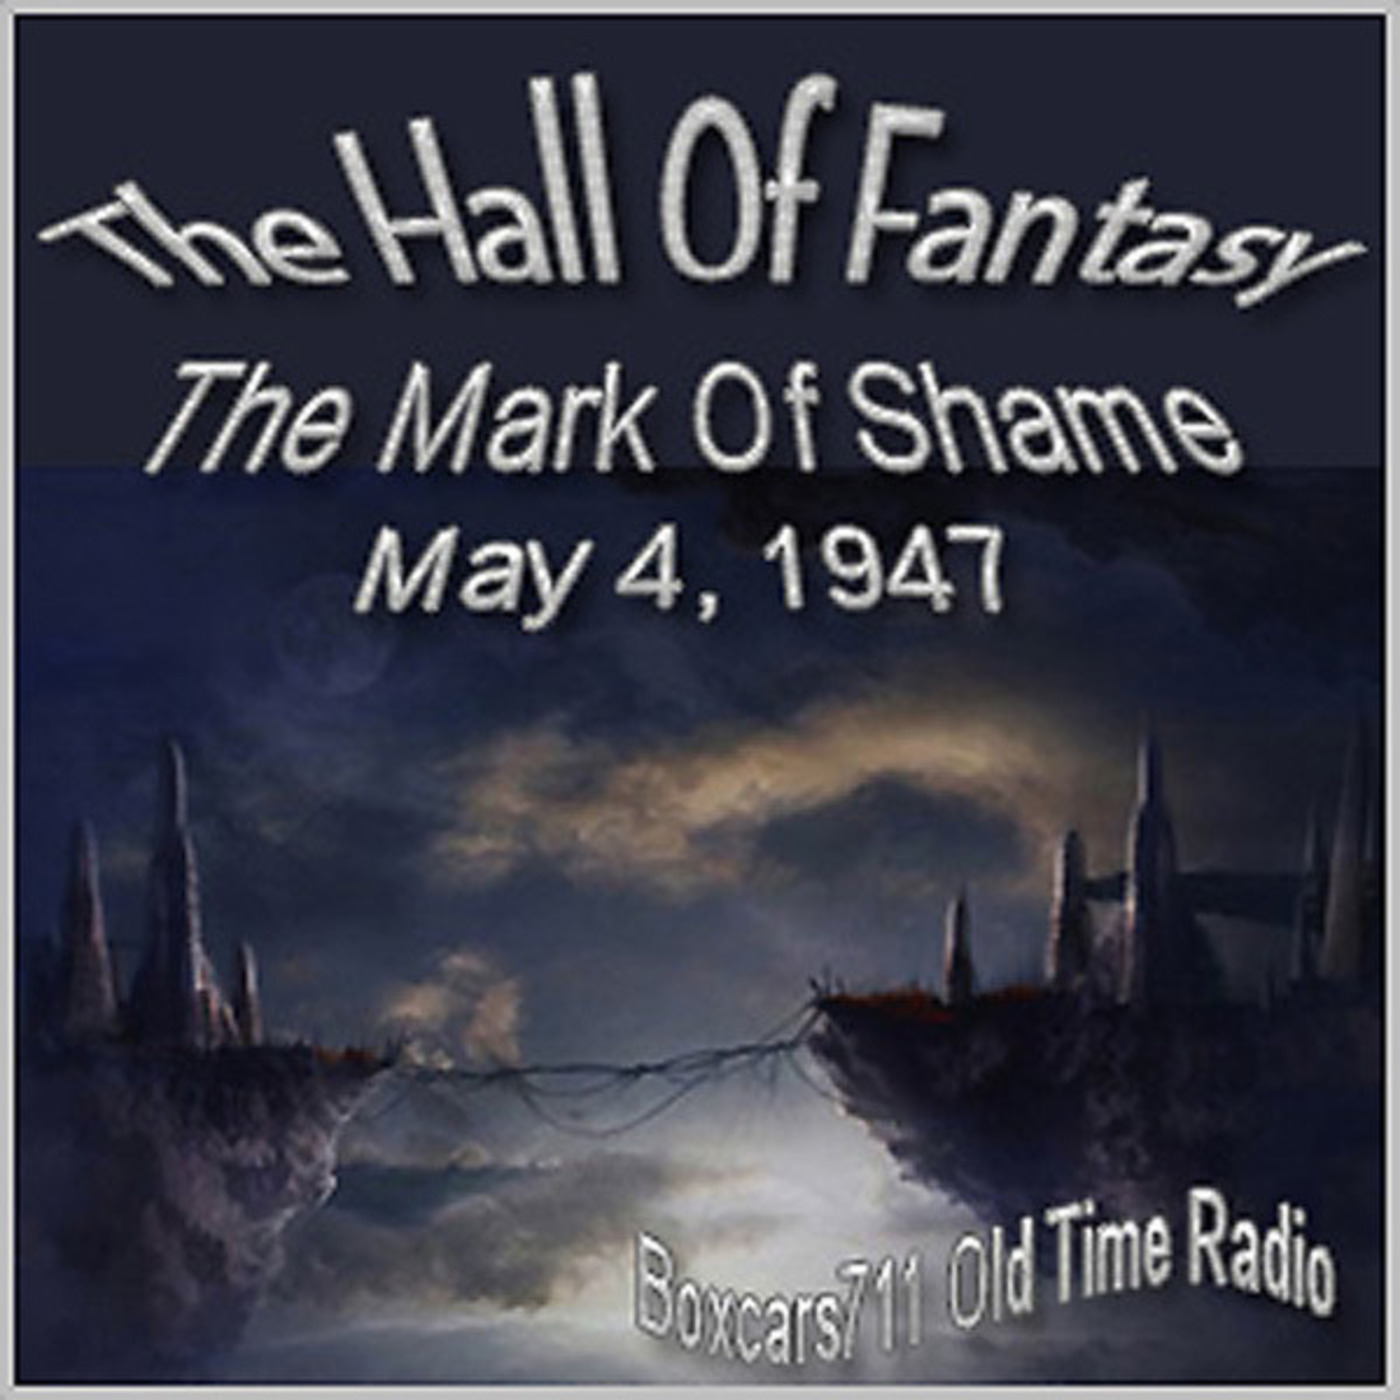 Episode 9664: The Hall Of Fantasy - 